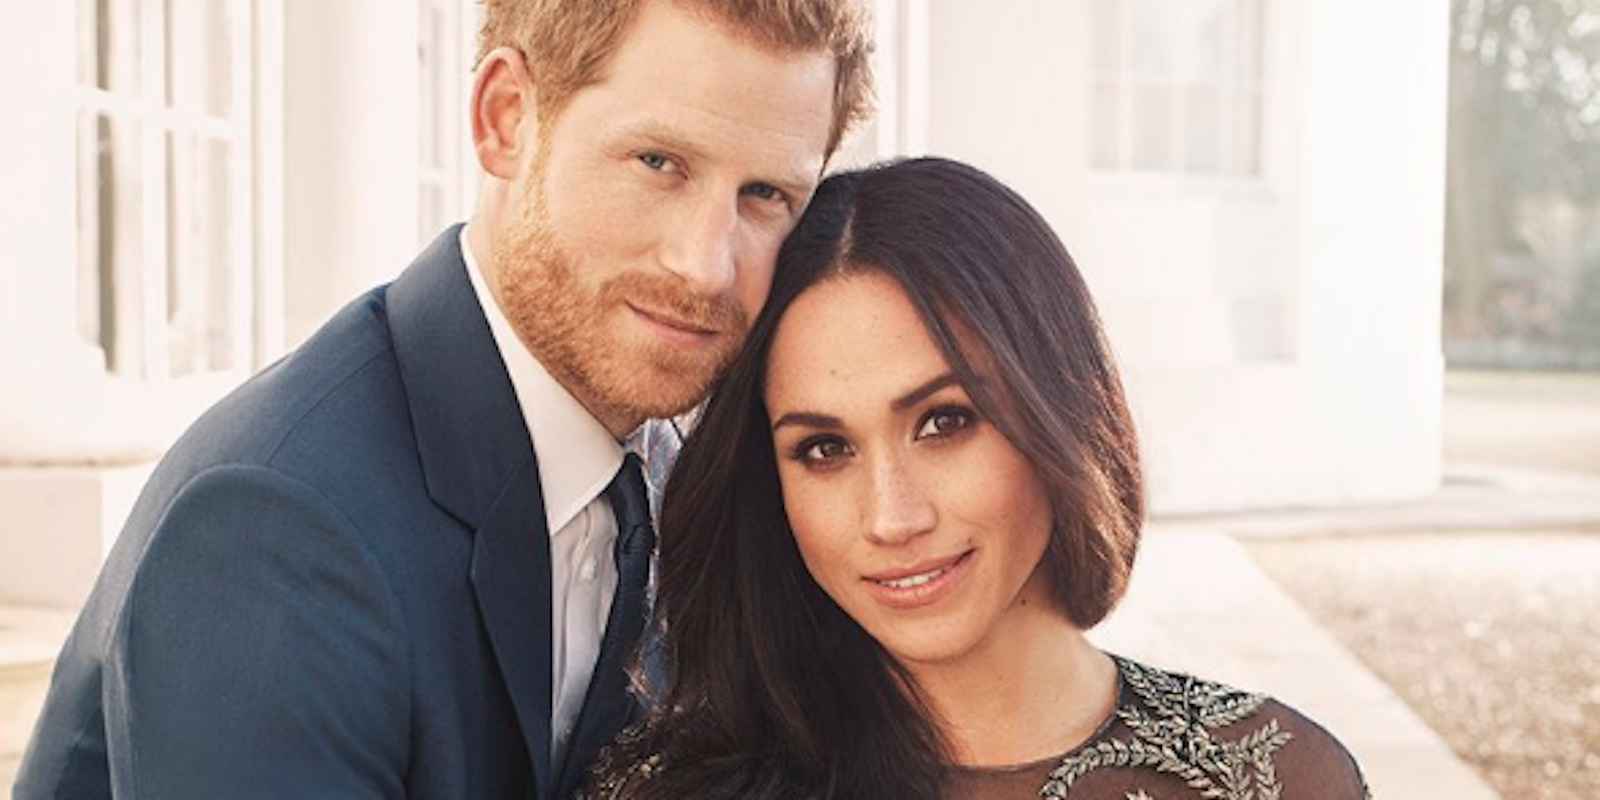 Prince Harry and Meghan Markles engagement photo.